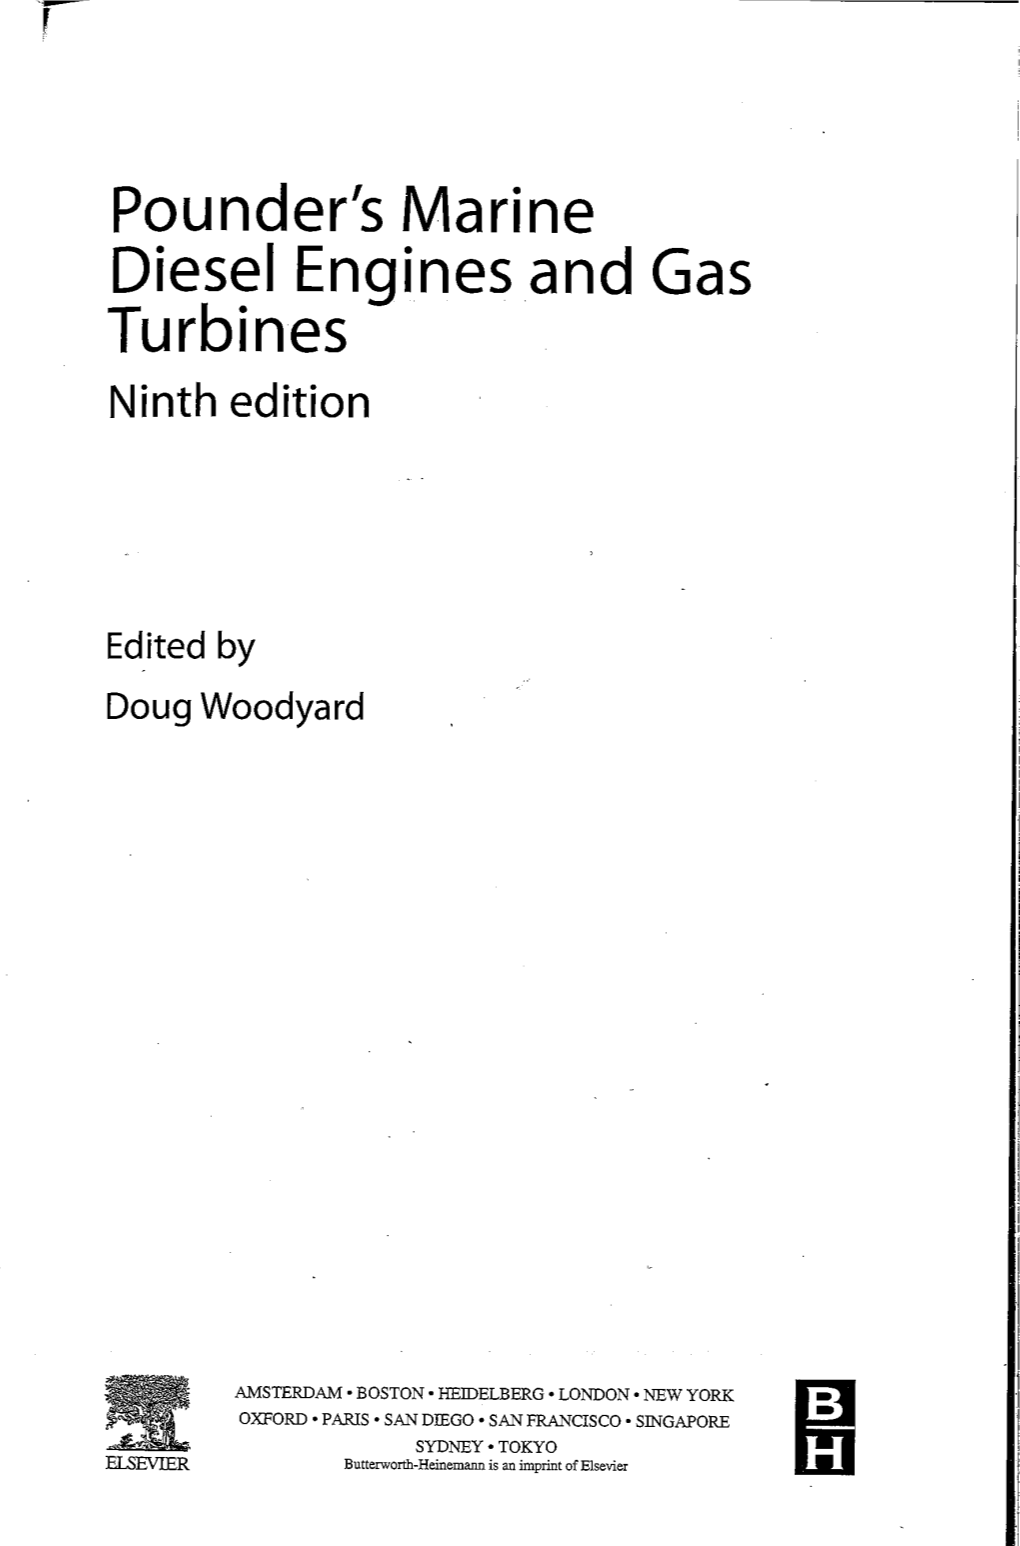 Pounder's Marine Diesel Engines and Gas Turbines Ninth Edition